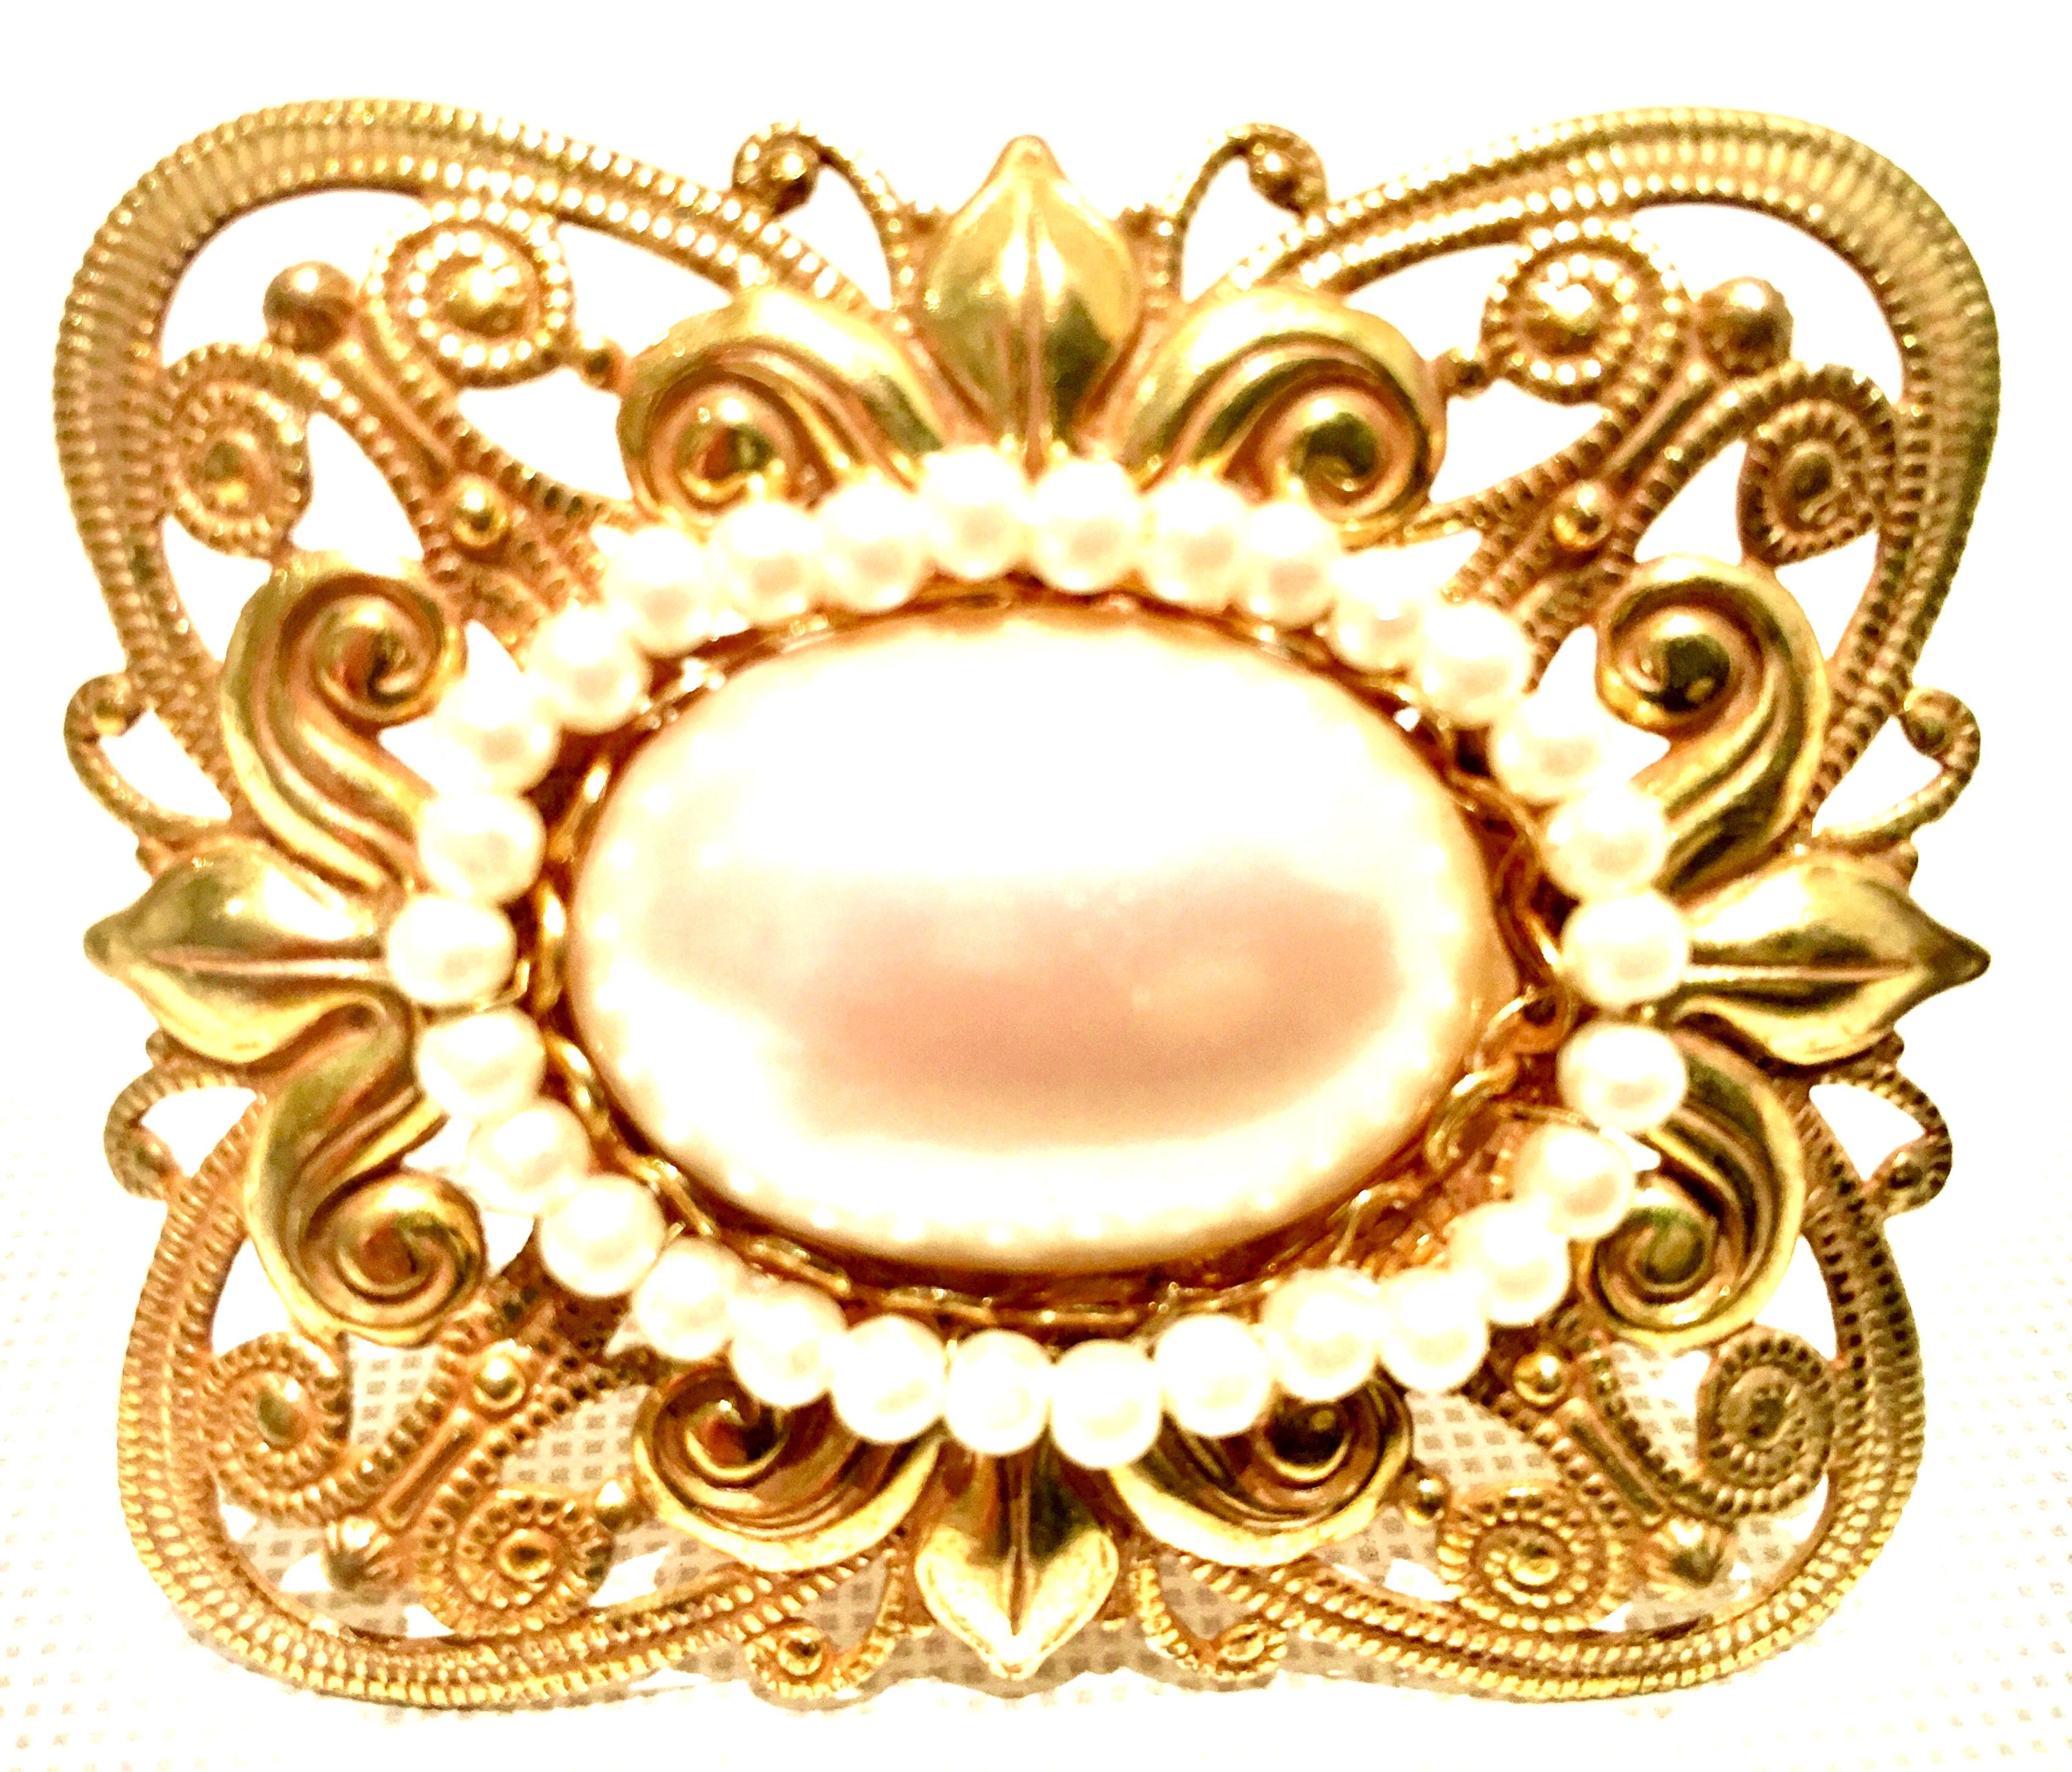 Mid-Century Miriam Haskell Astract Russian Gold Fligree Abstract Butterfly Brooch-Signed. This rare and signed brooch features, a large central oval faux pearl surround by round faux pearl beads. Singed on the underside, Miriam Haskell. Measures: